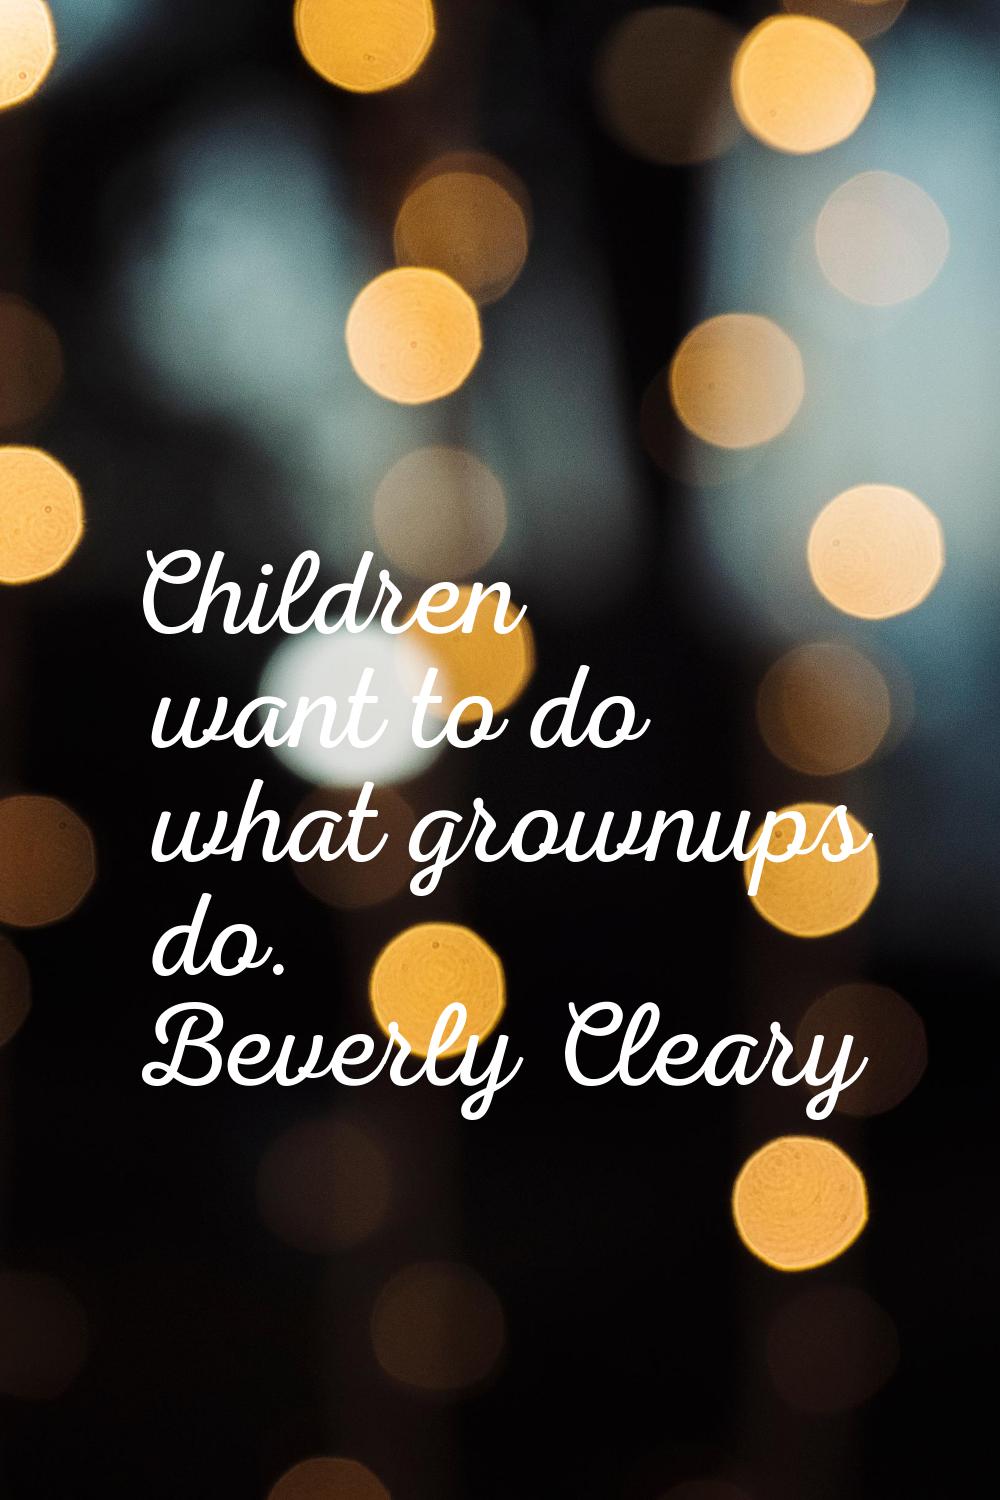 Children want to do what grownups do.